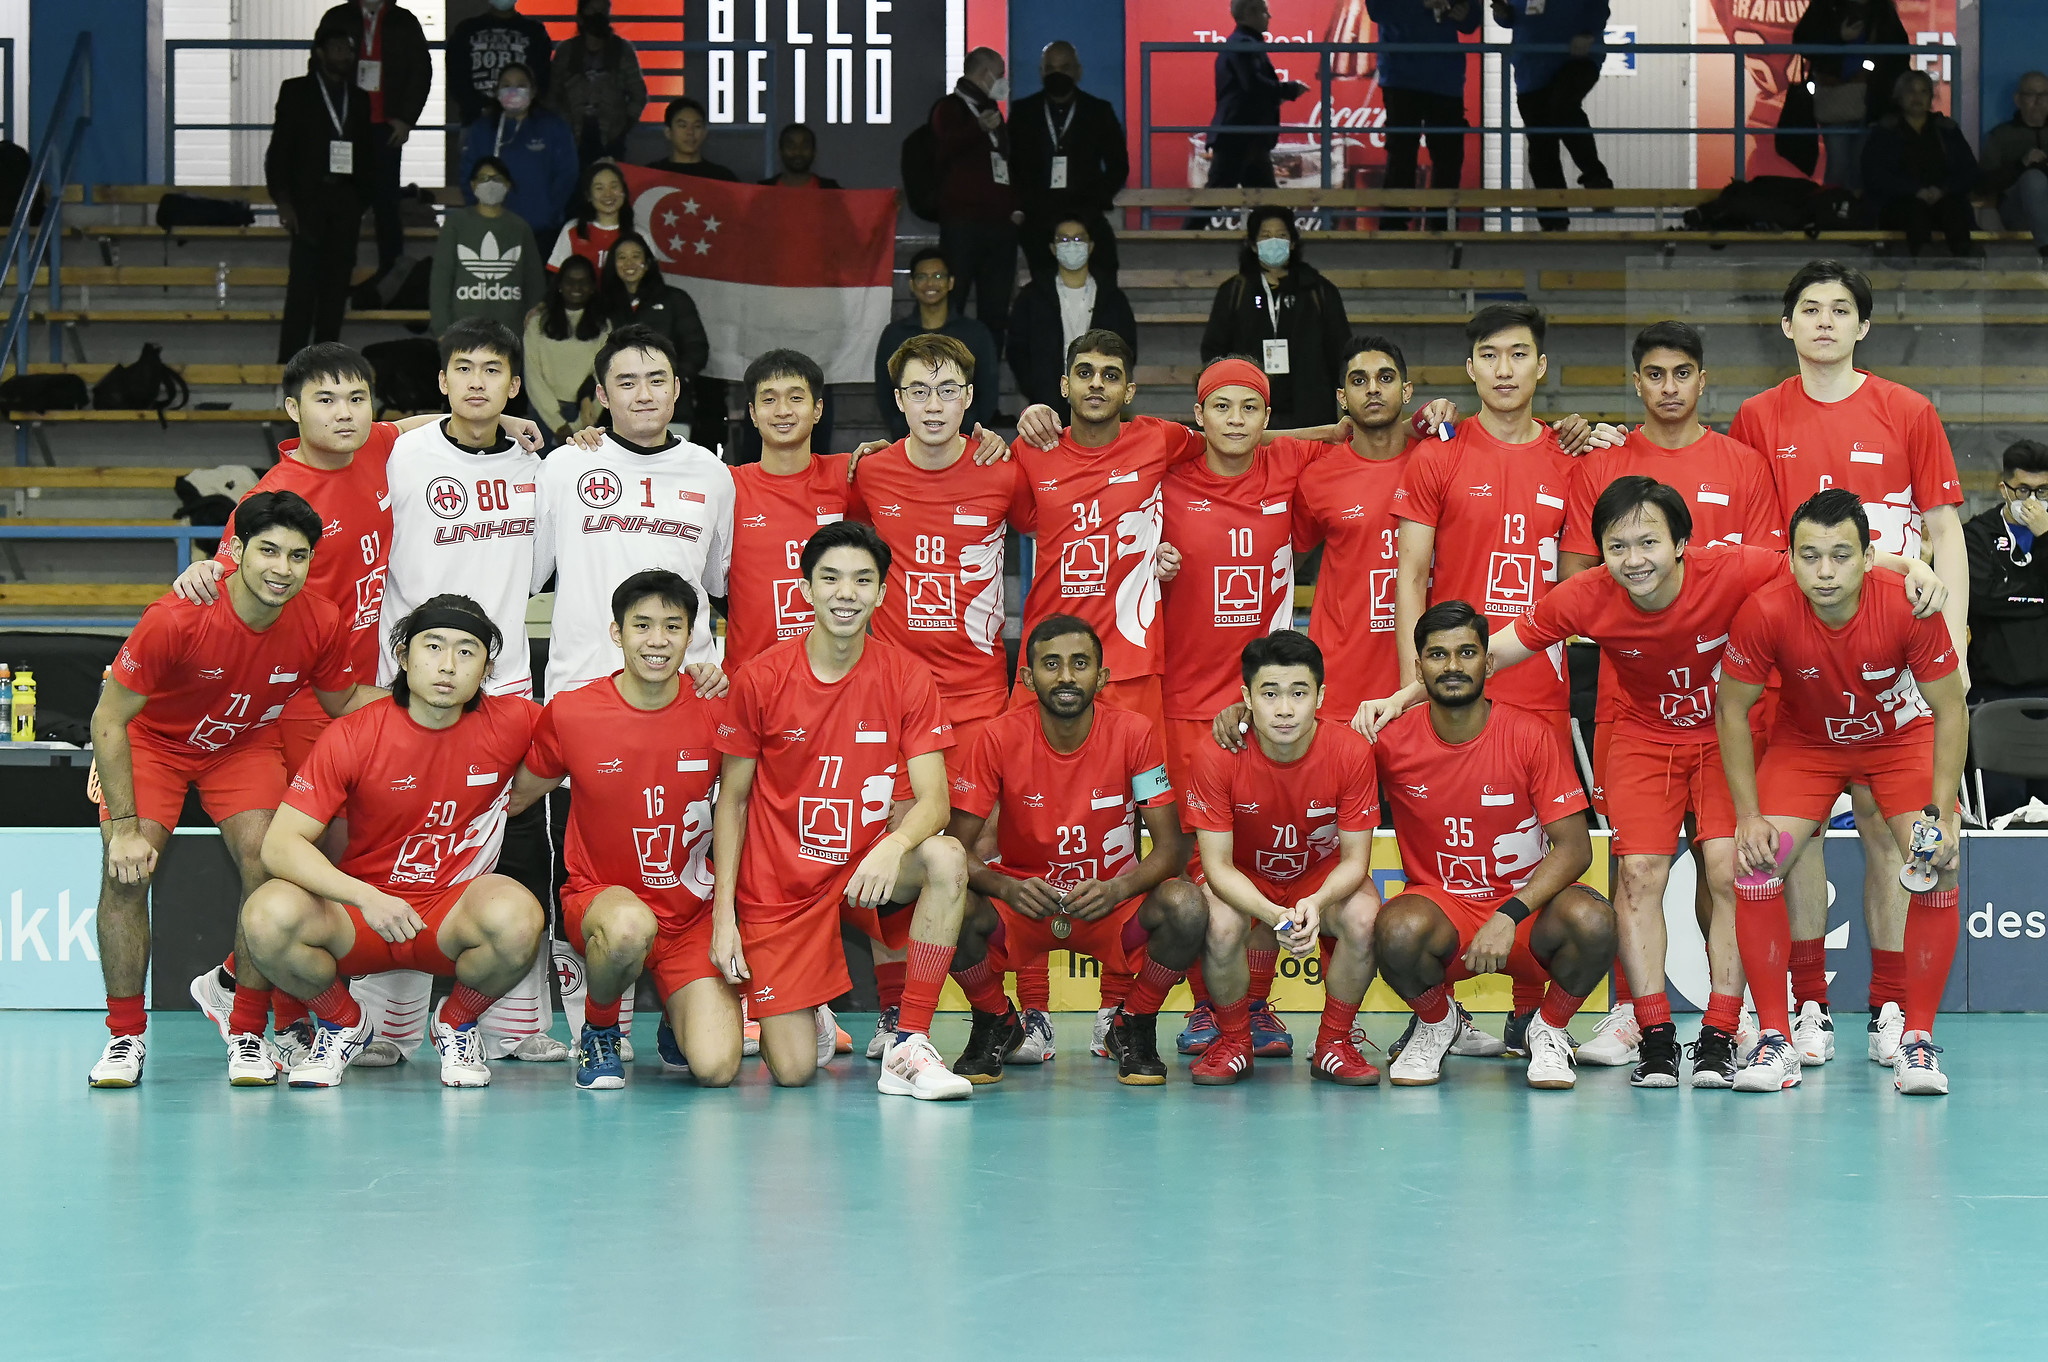 Singapore's Men's Floorballers, closed their World Championships campaign in 16th place!